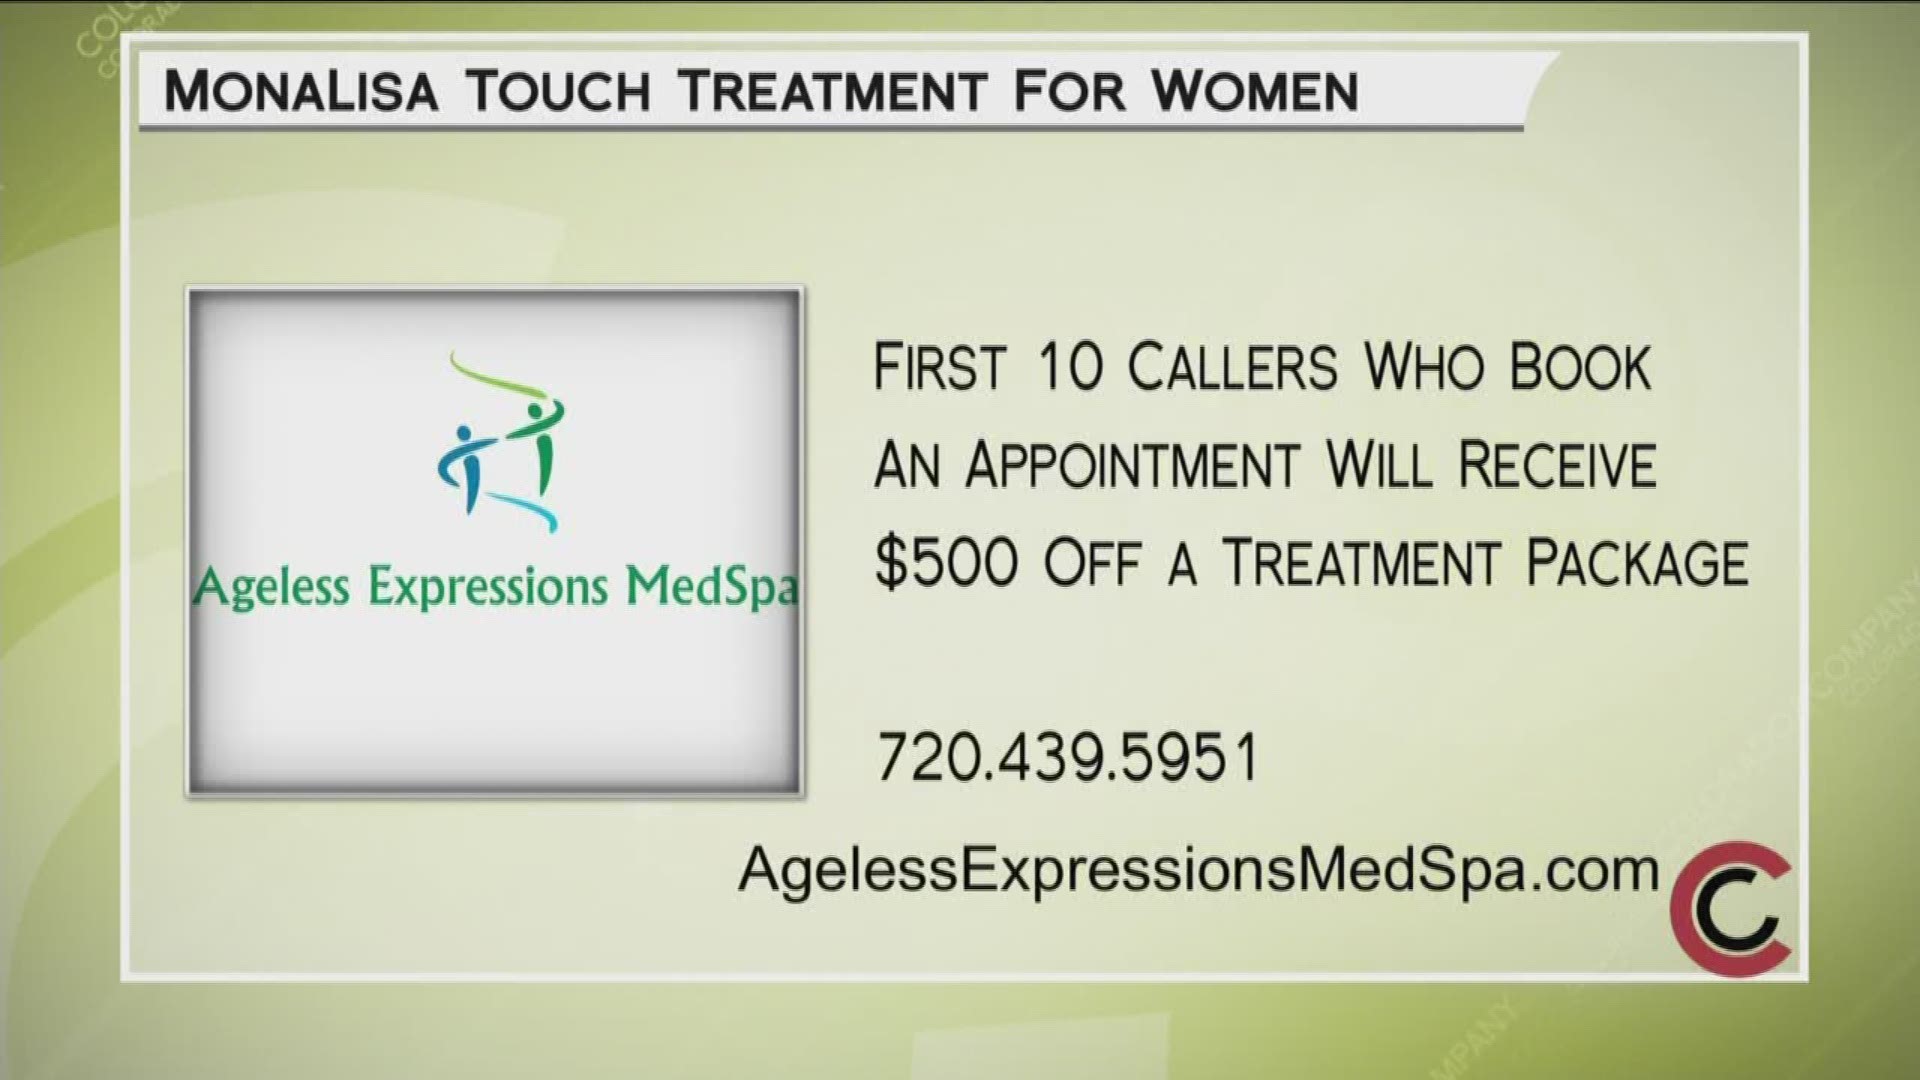 Call 720.439.5951 or visit AgelessExpressionsMedSpa.com to find out if their treatment package is right for you.